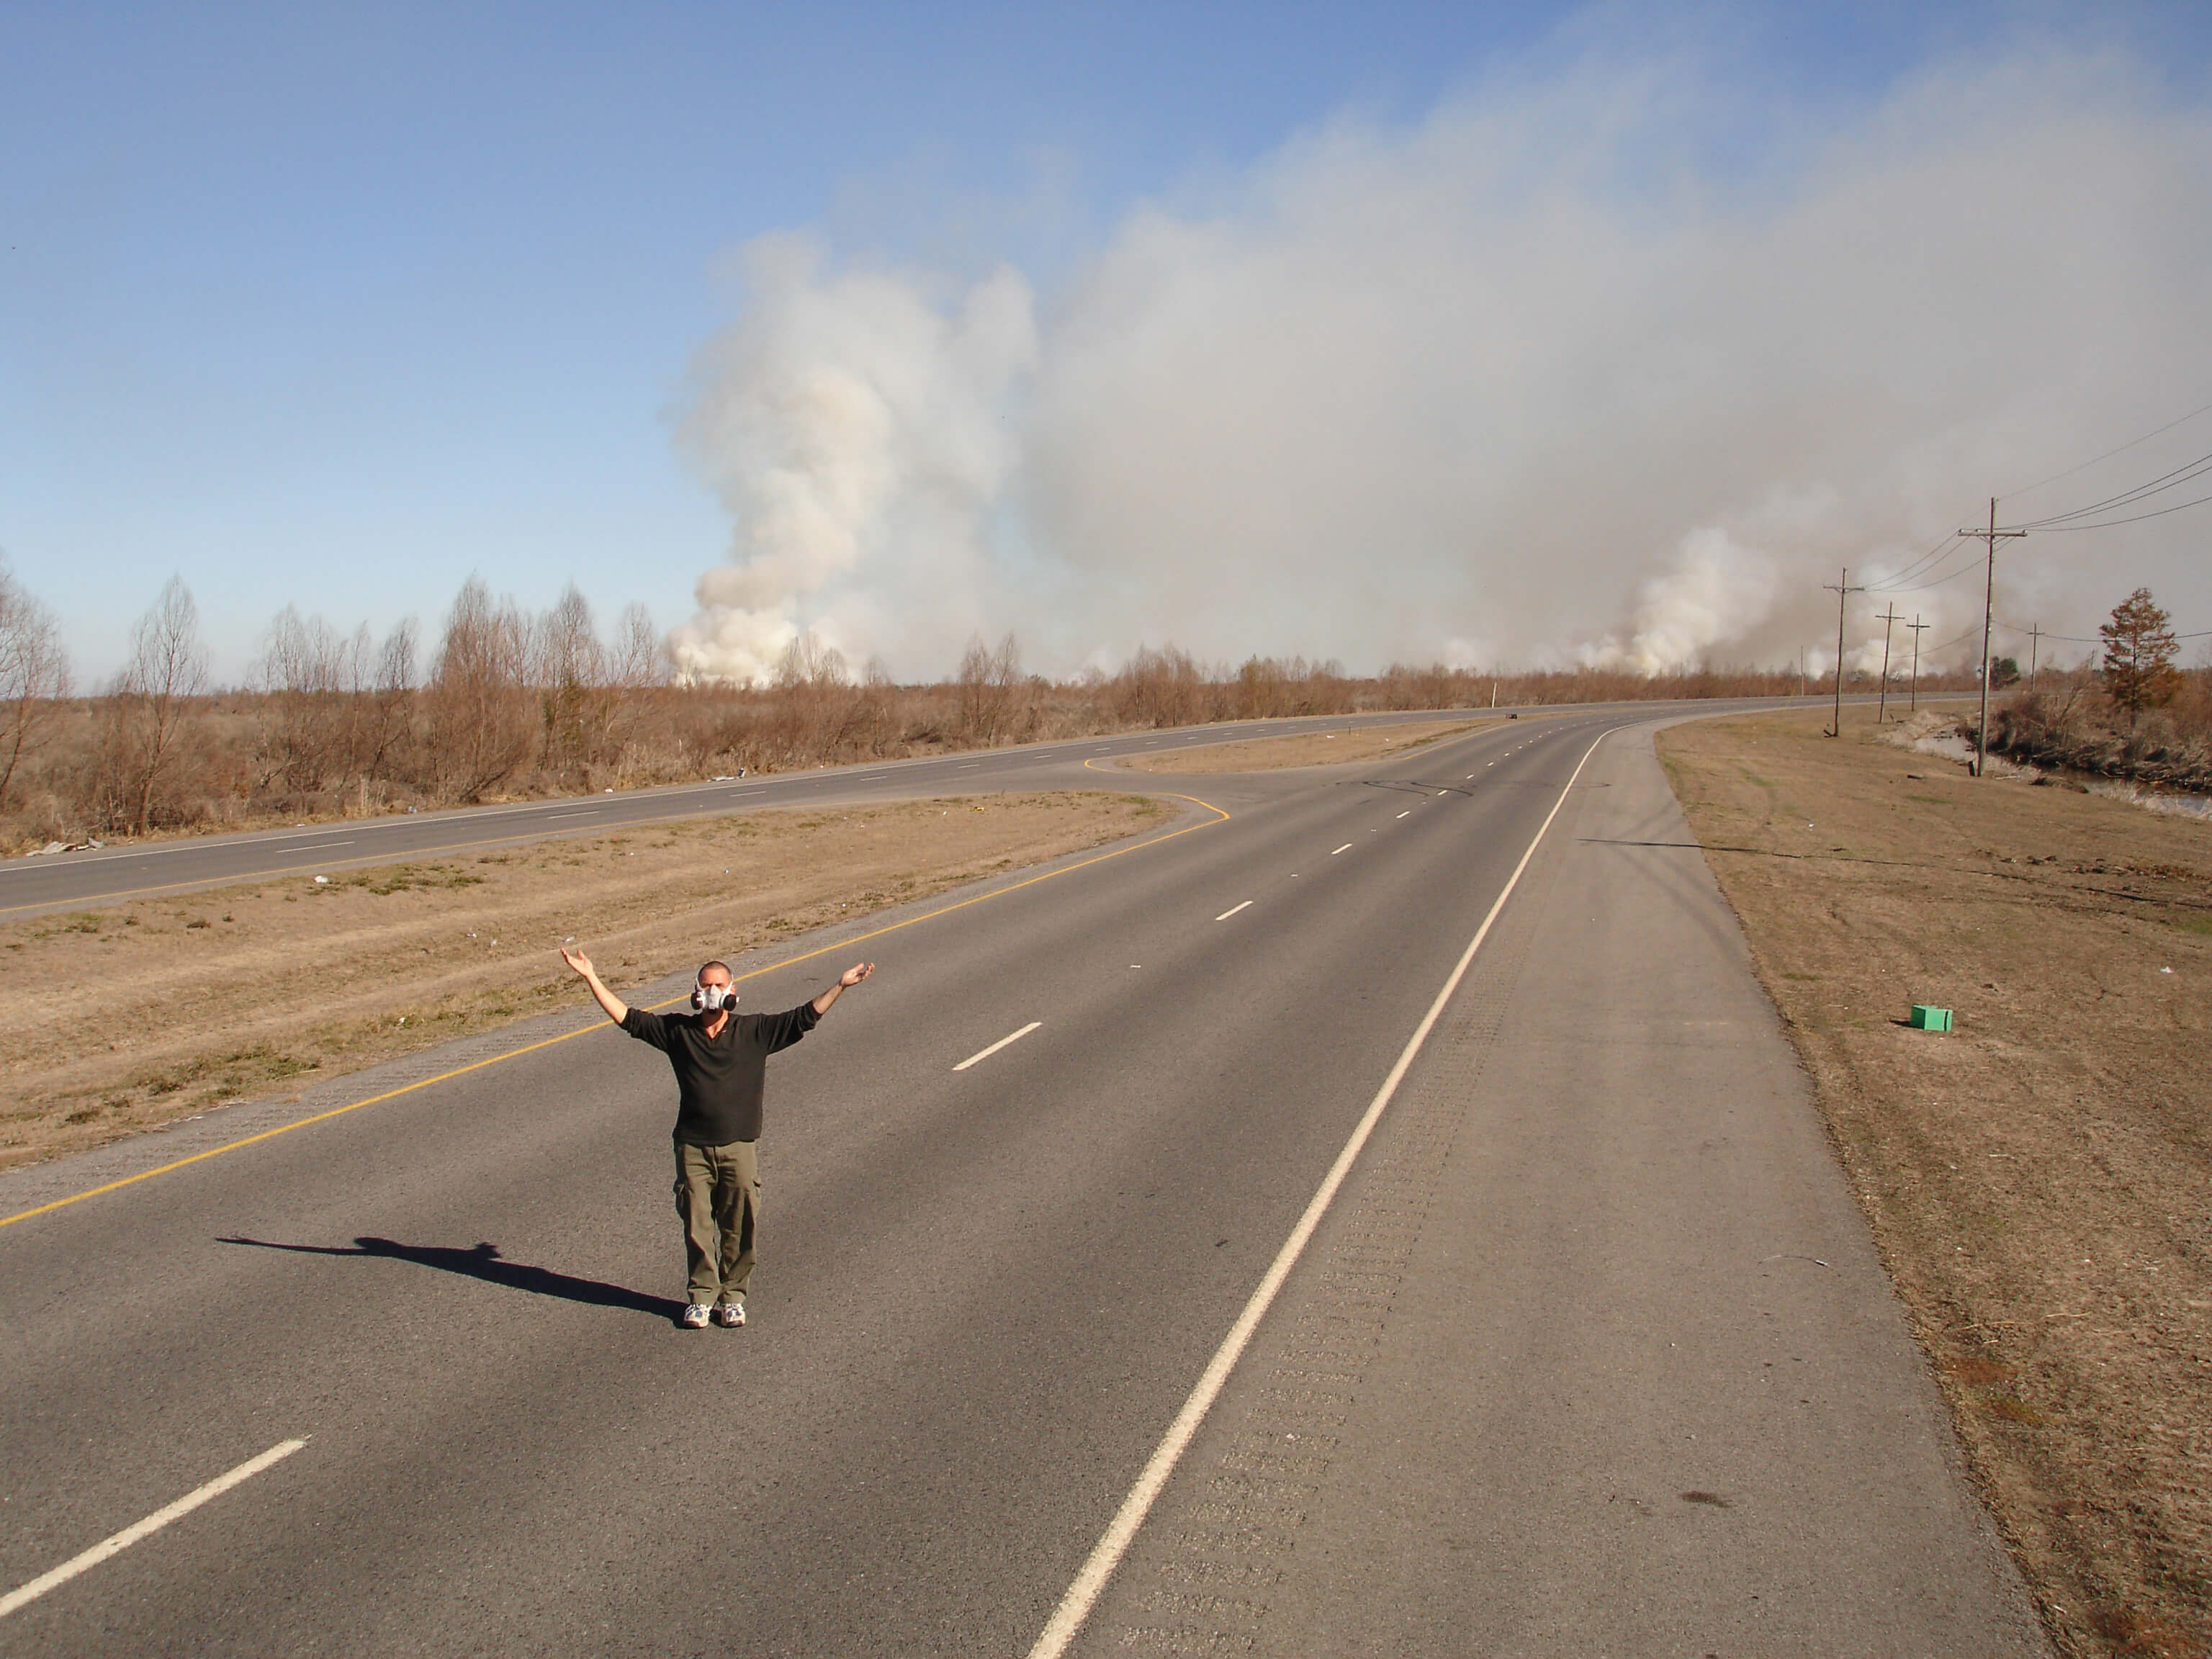 Still from My Louisiana Love. A man, wearing an air filtering mask, stands in the middle of a 4 lane road. There are multiple clouds of smoke in the background.